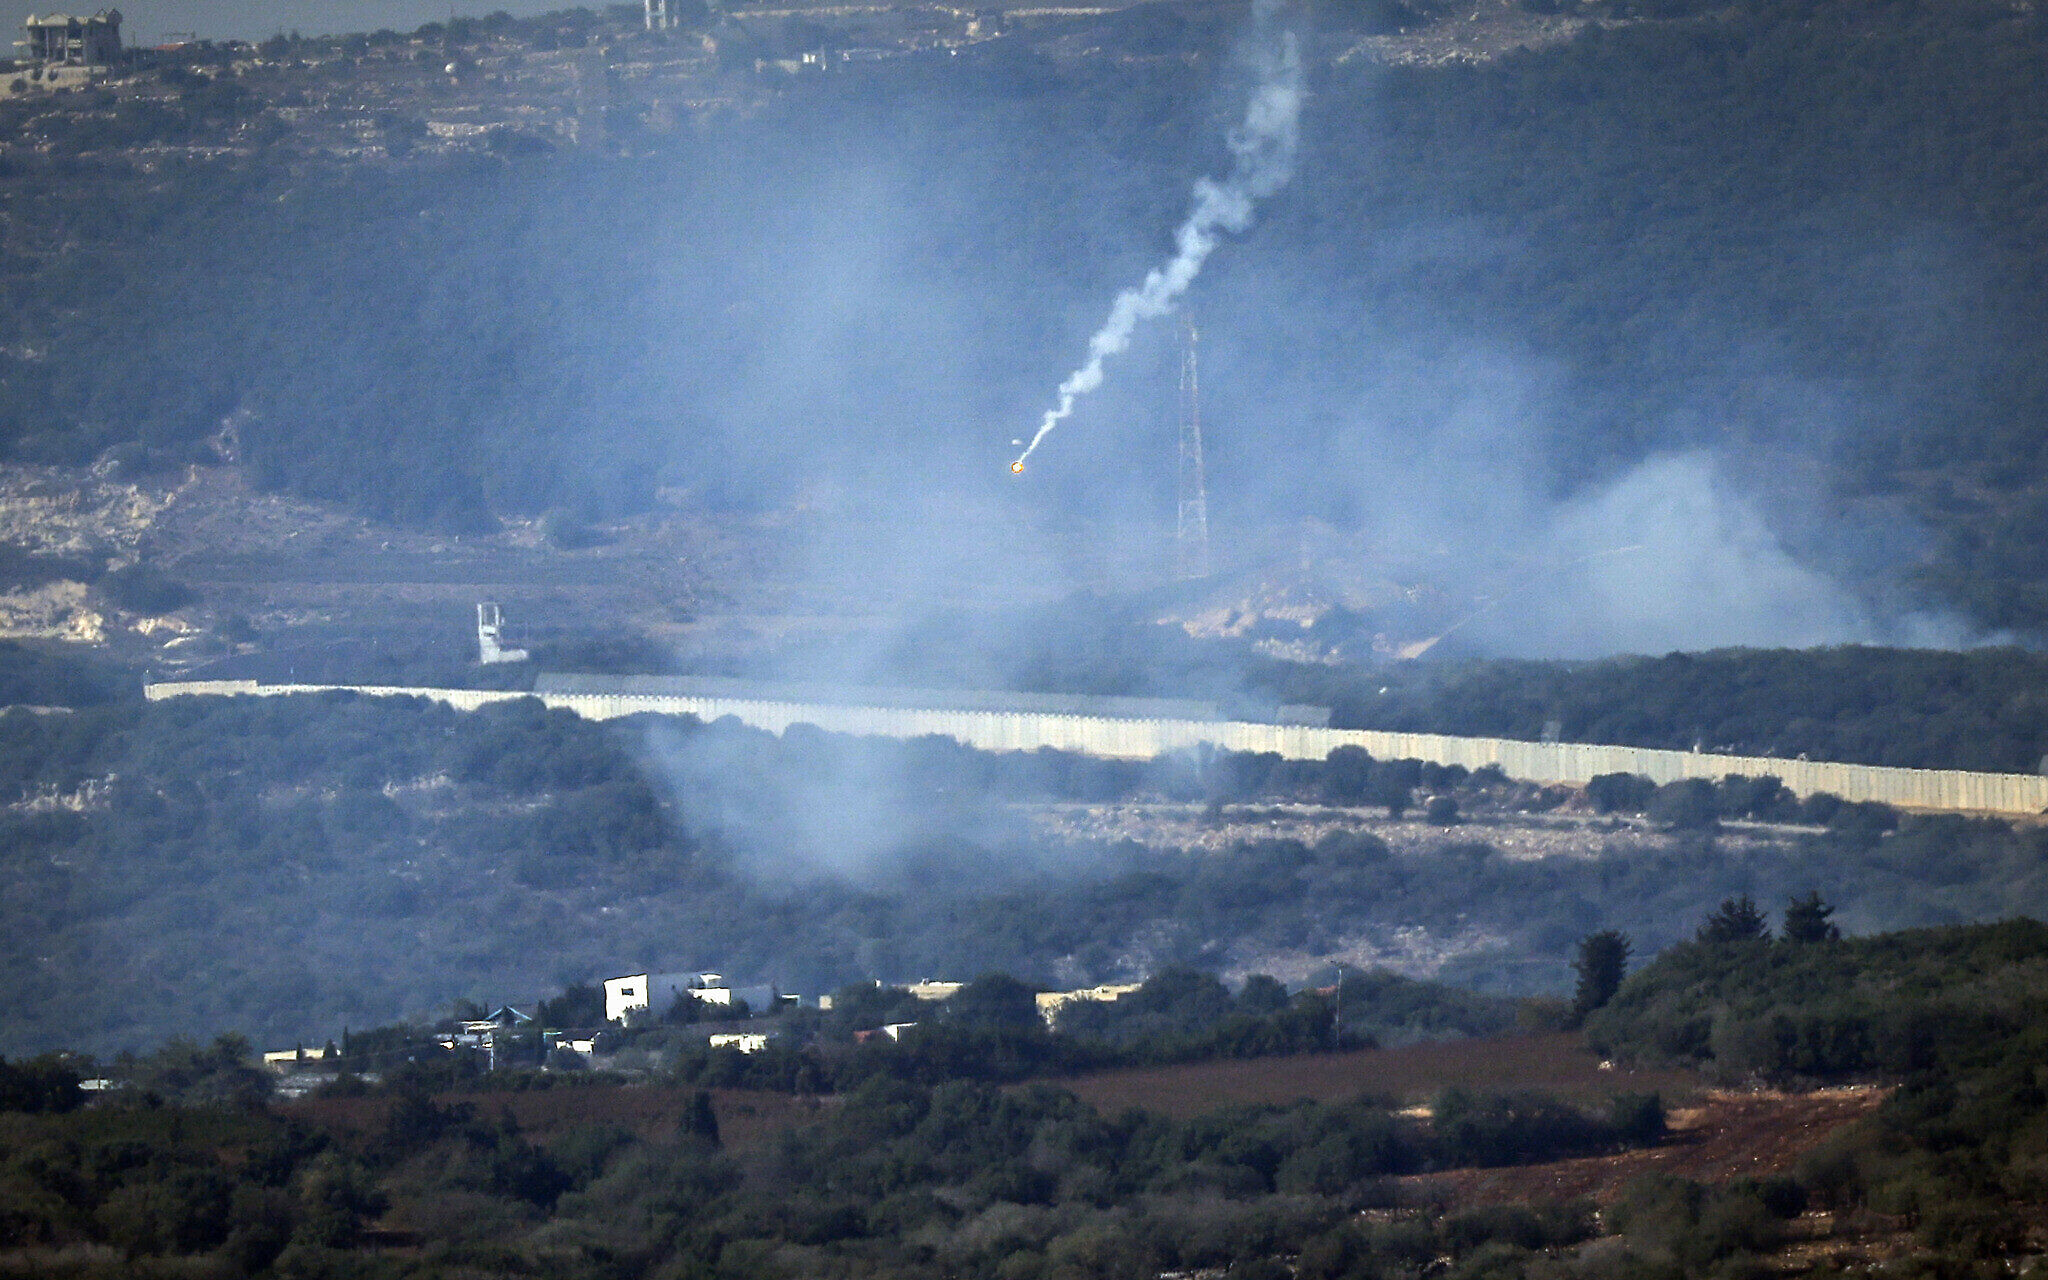 Weapons flood Israel's West Bank, fueling fears of new war front